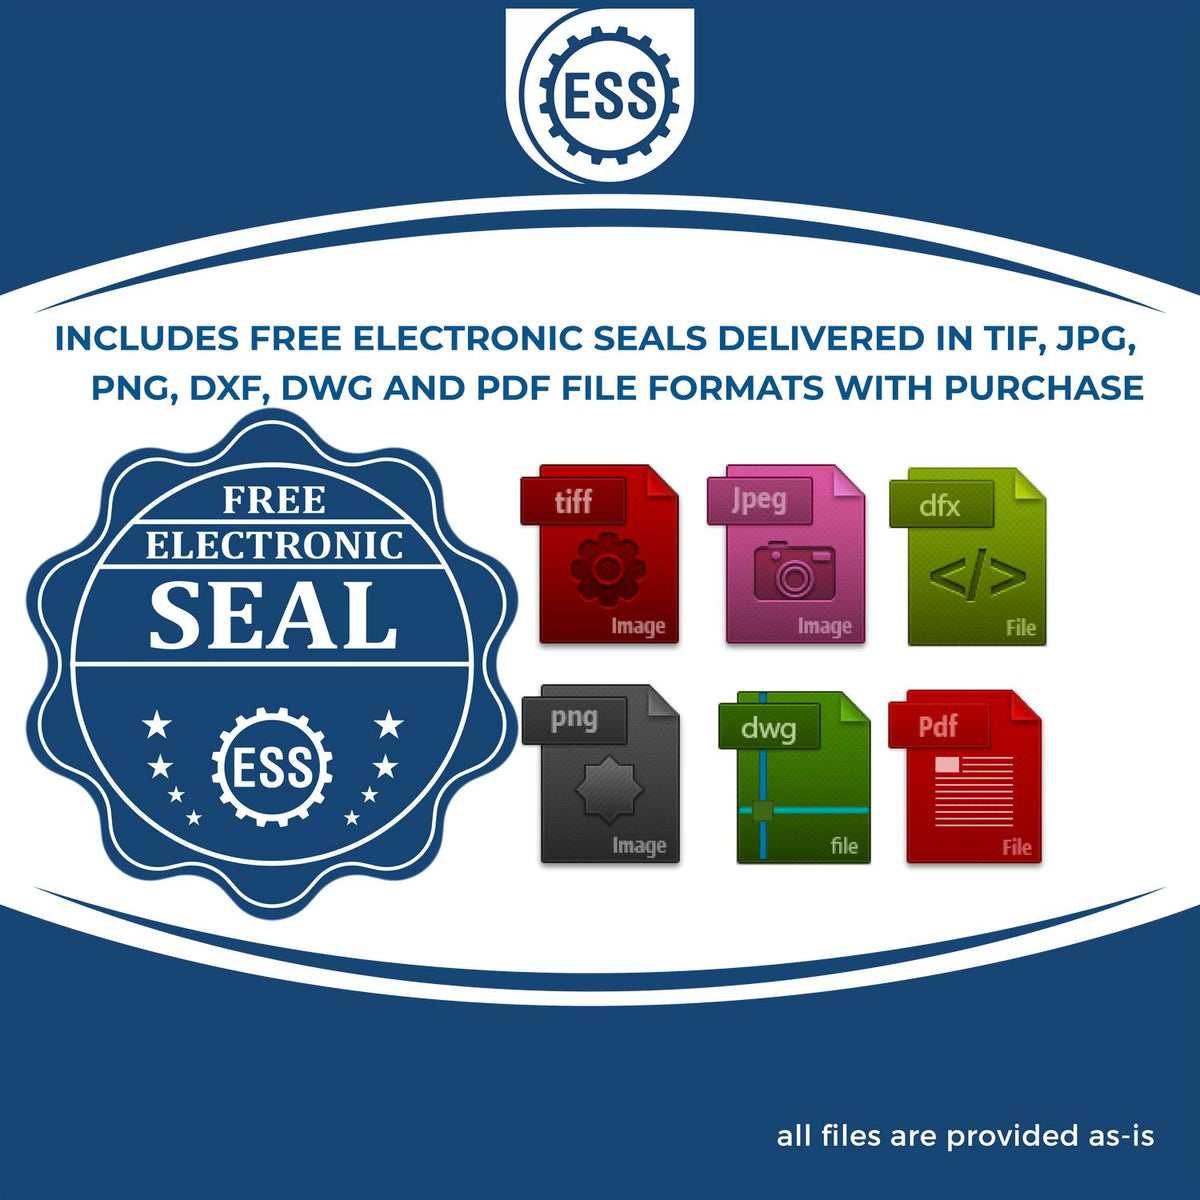 An infographic for the free electronic seal for the Gift Oklahoma Engineer Seal illustrating the different file type icons such as DXF, DWG, TIF, JPG and PNG.